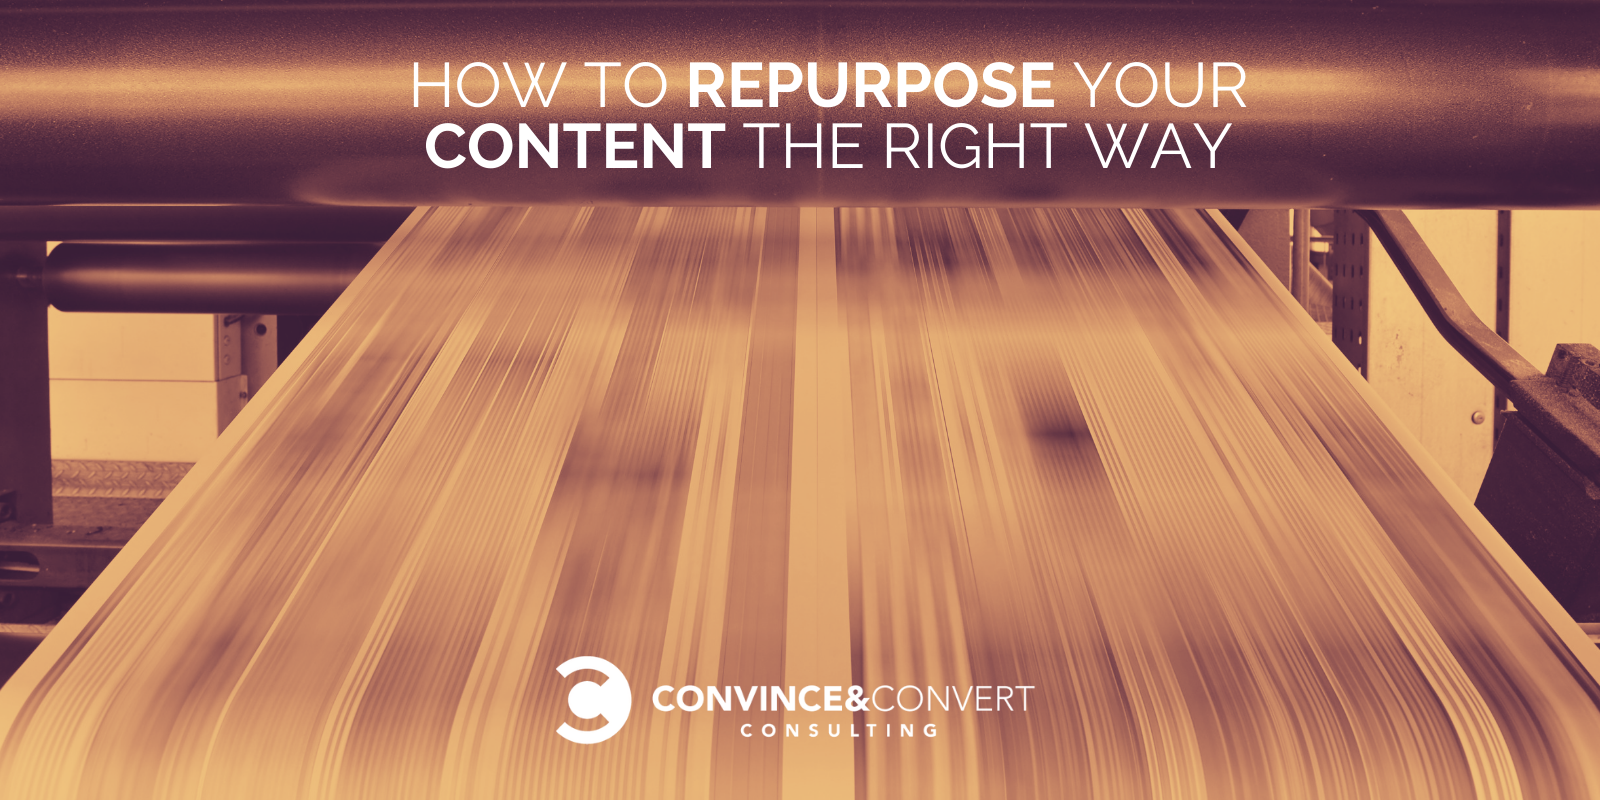 How to Repurpose Your Content the Right Way